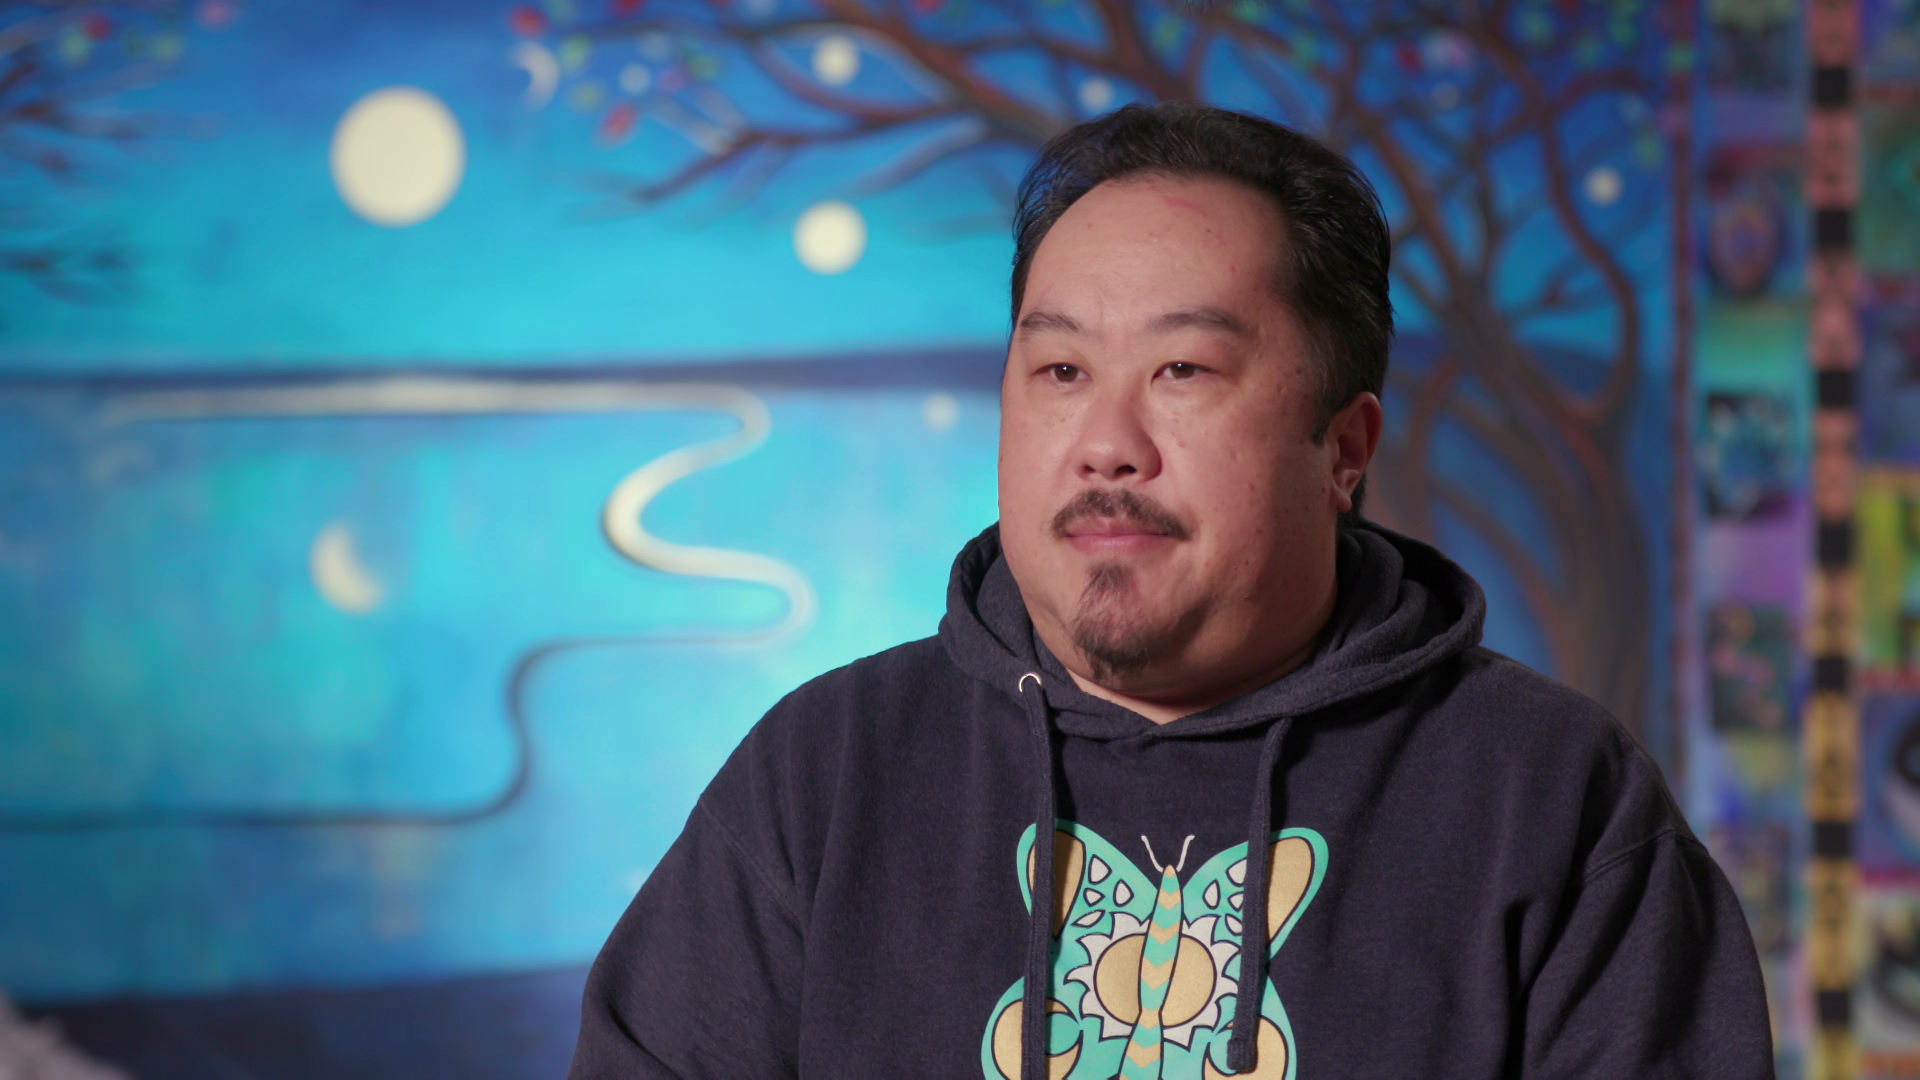 Xong Vang speaks during ah interview with a mural of trees and a night sky in the background.